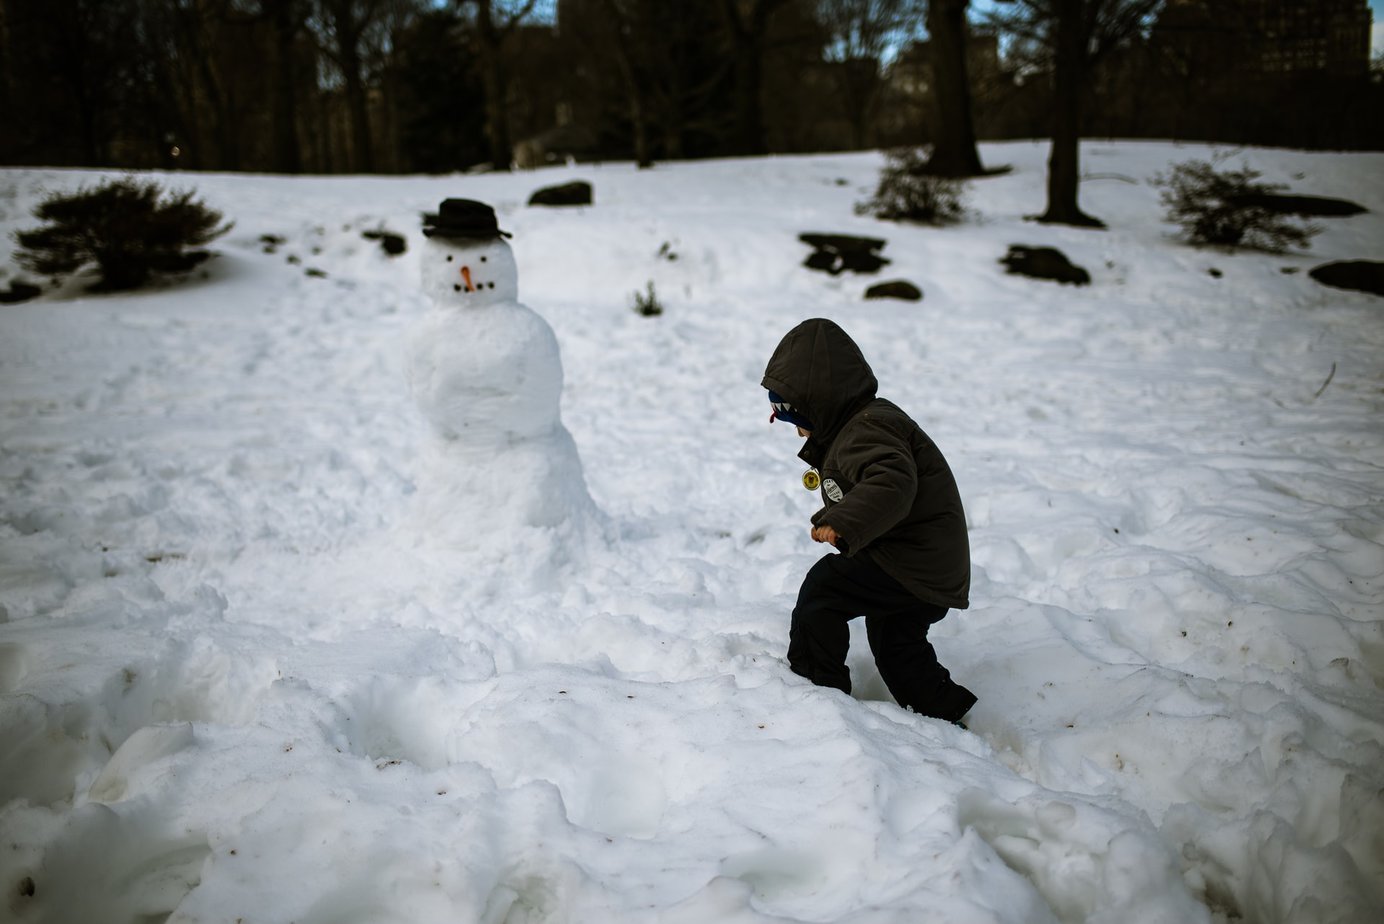 How do you encourage your child to spend time outside in the winter?